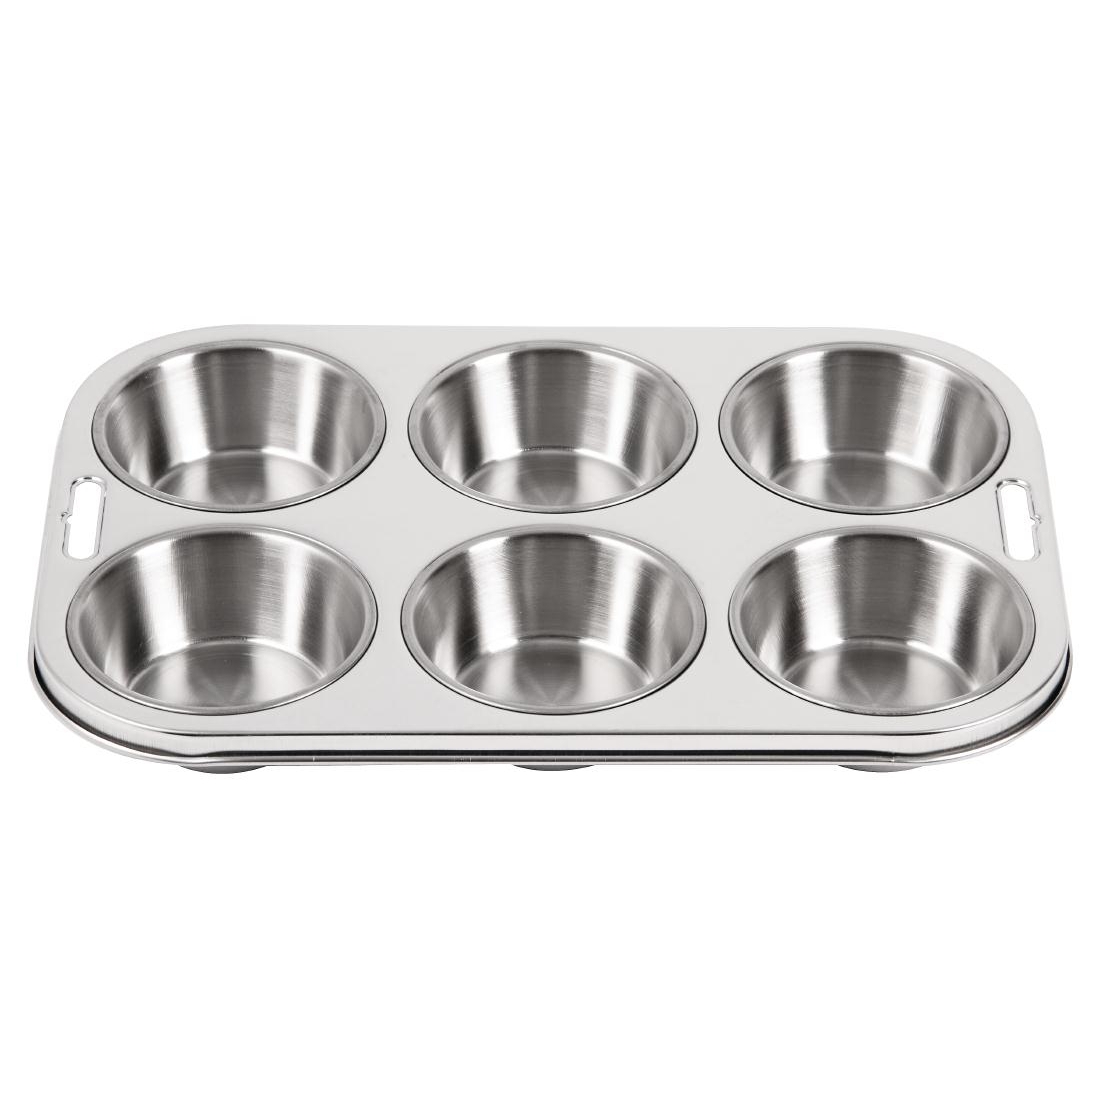 Vogue Stainless Steel 6 Cup Deep Muffin Tray